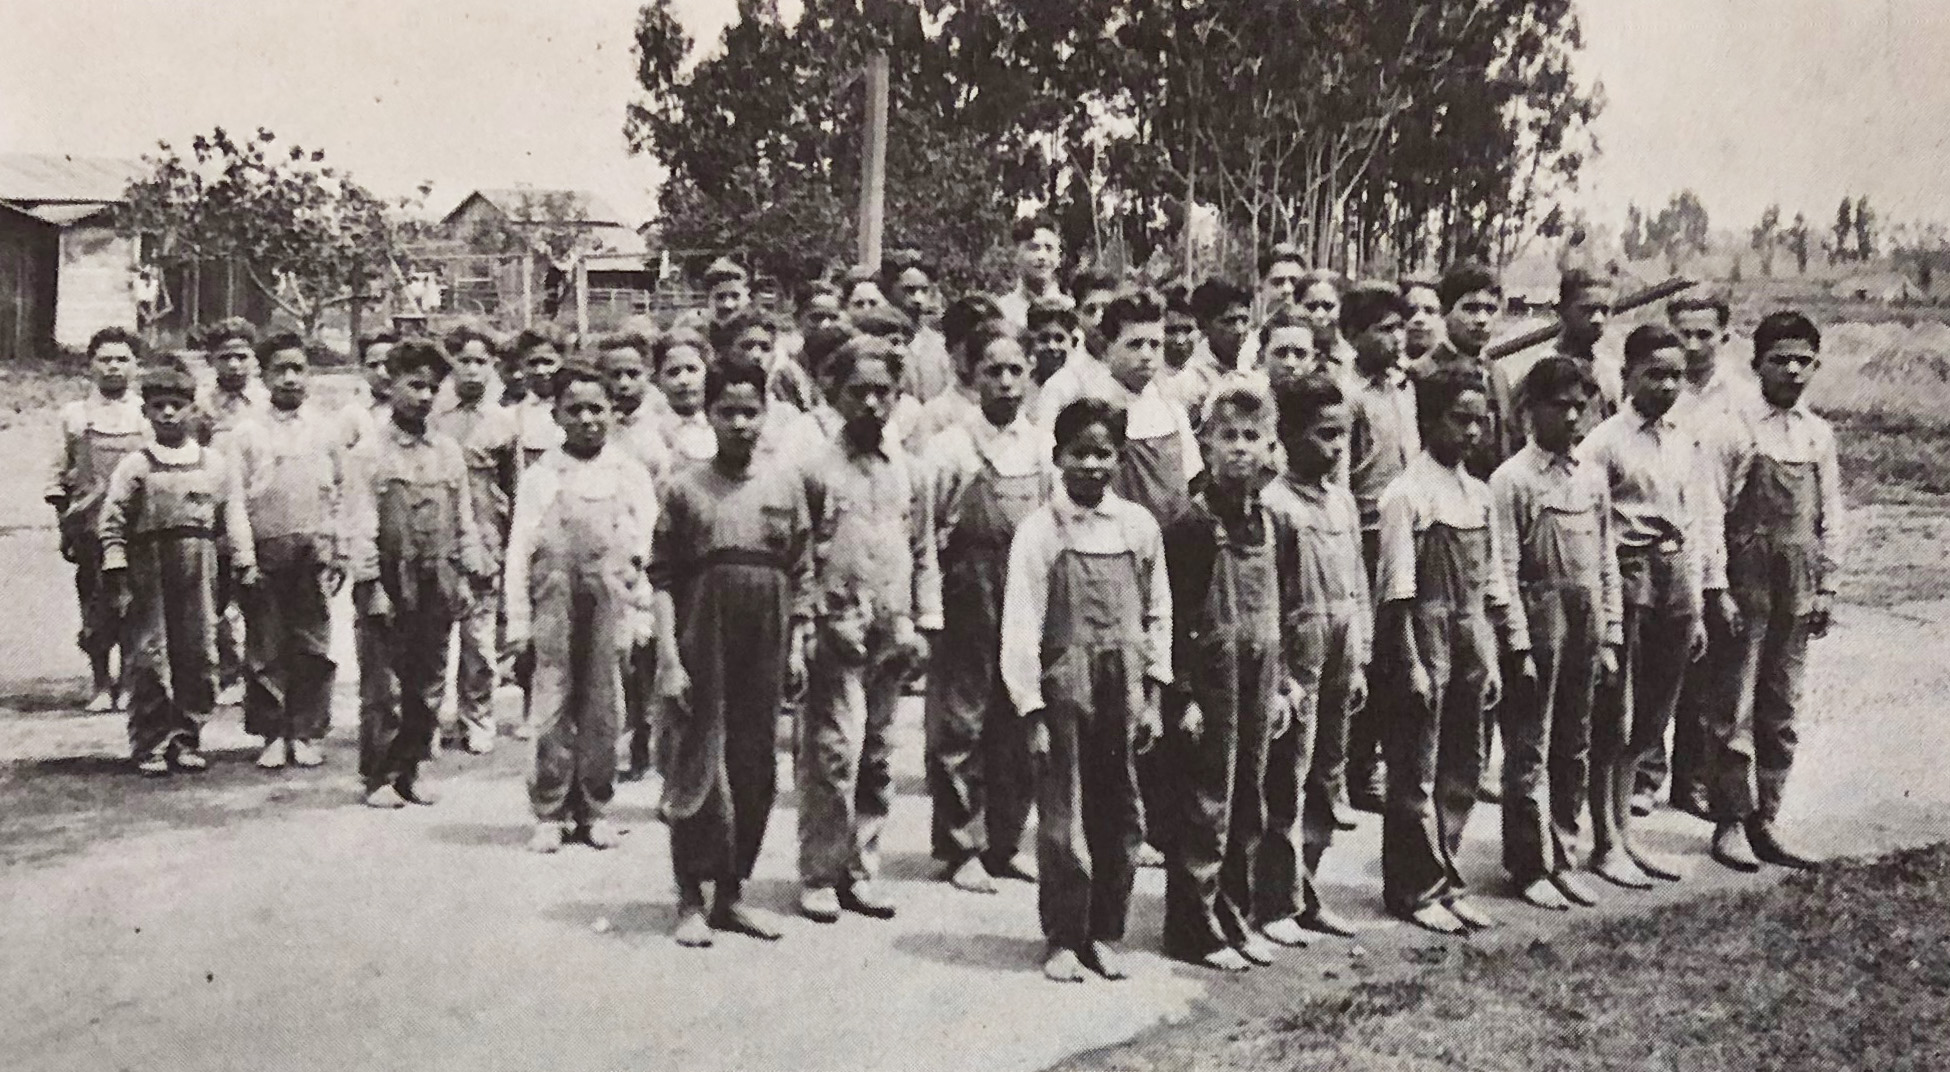 Mexican and Mexican American boys lined up at a boarding school in Gardena, CA in the 1920s